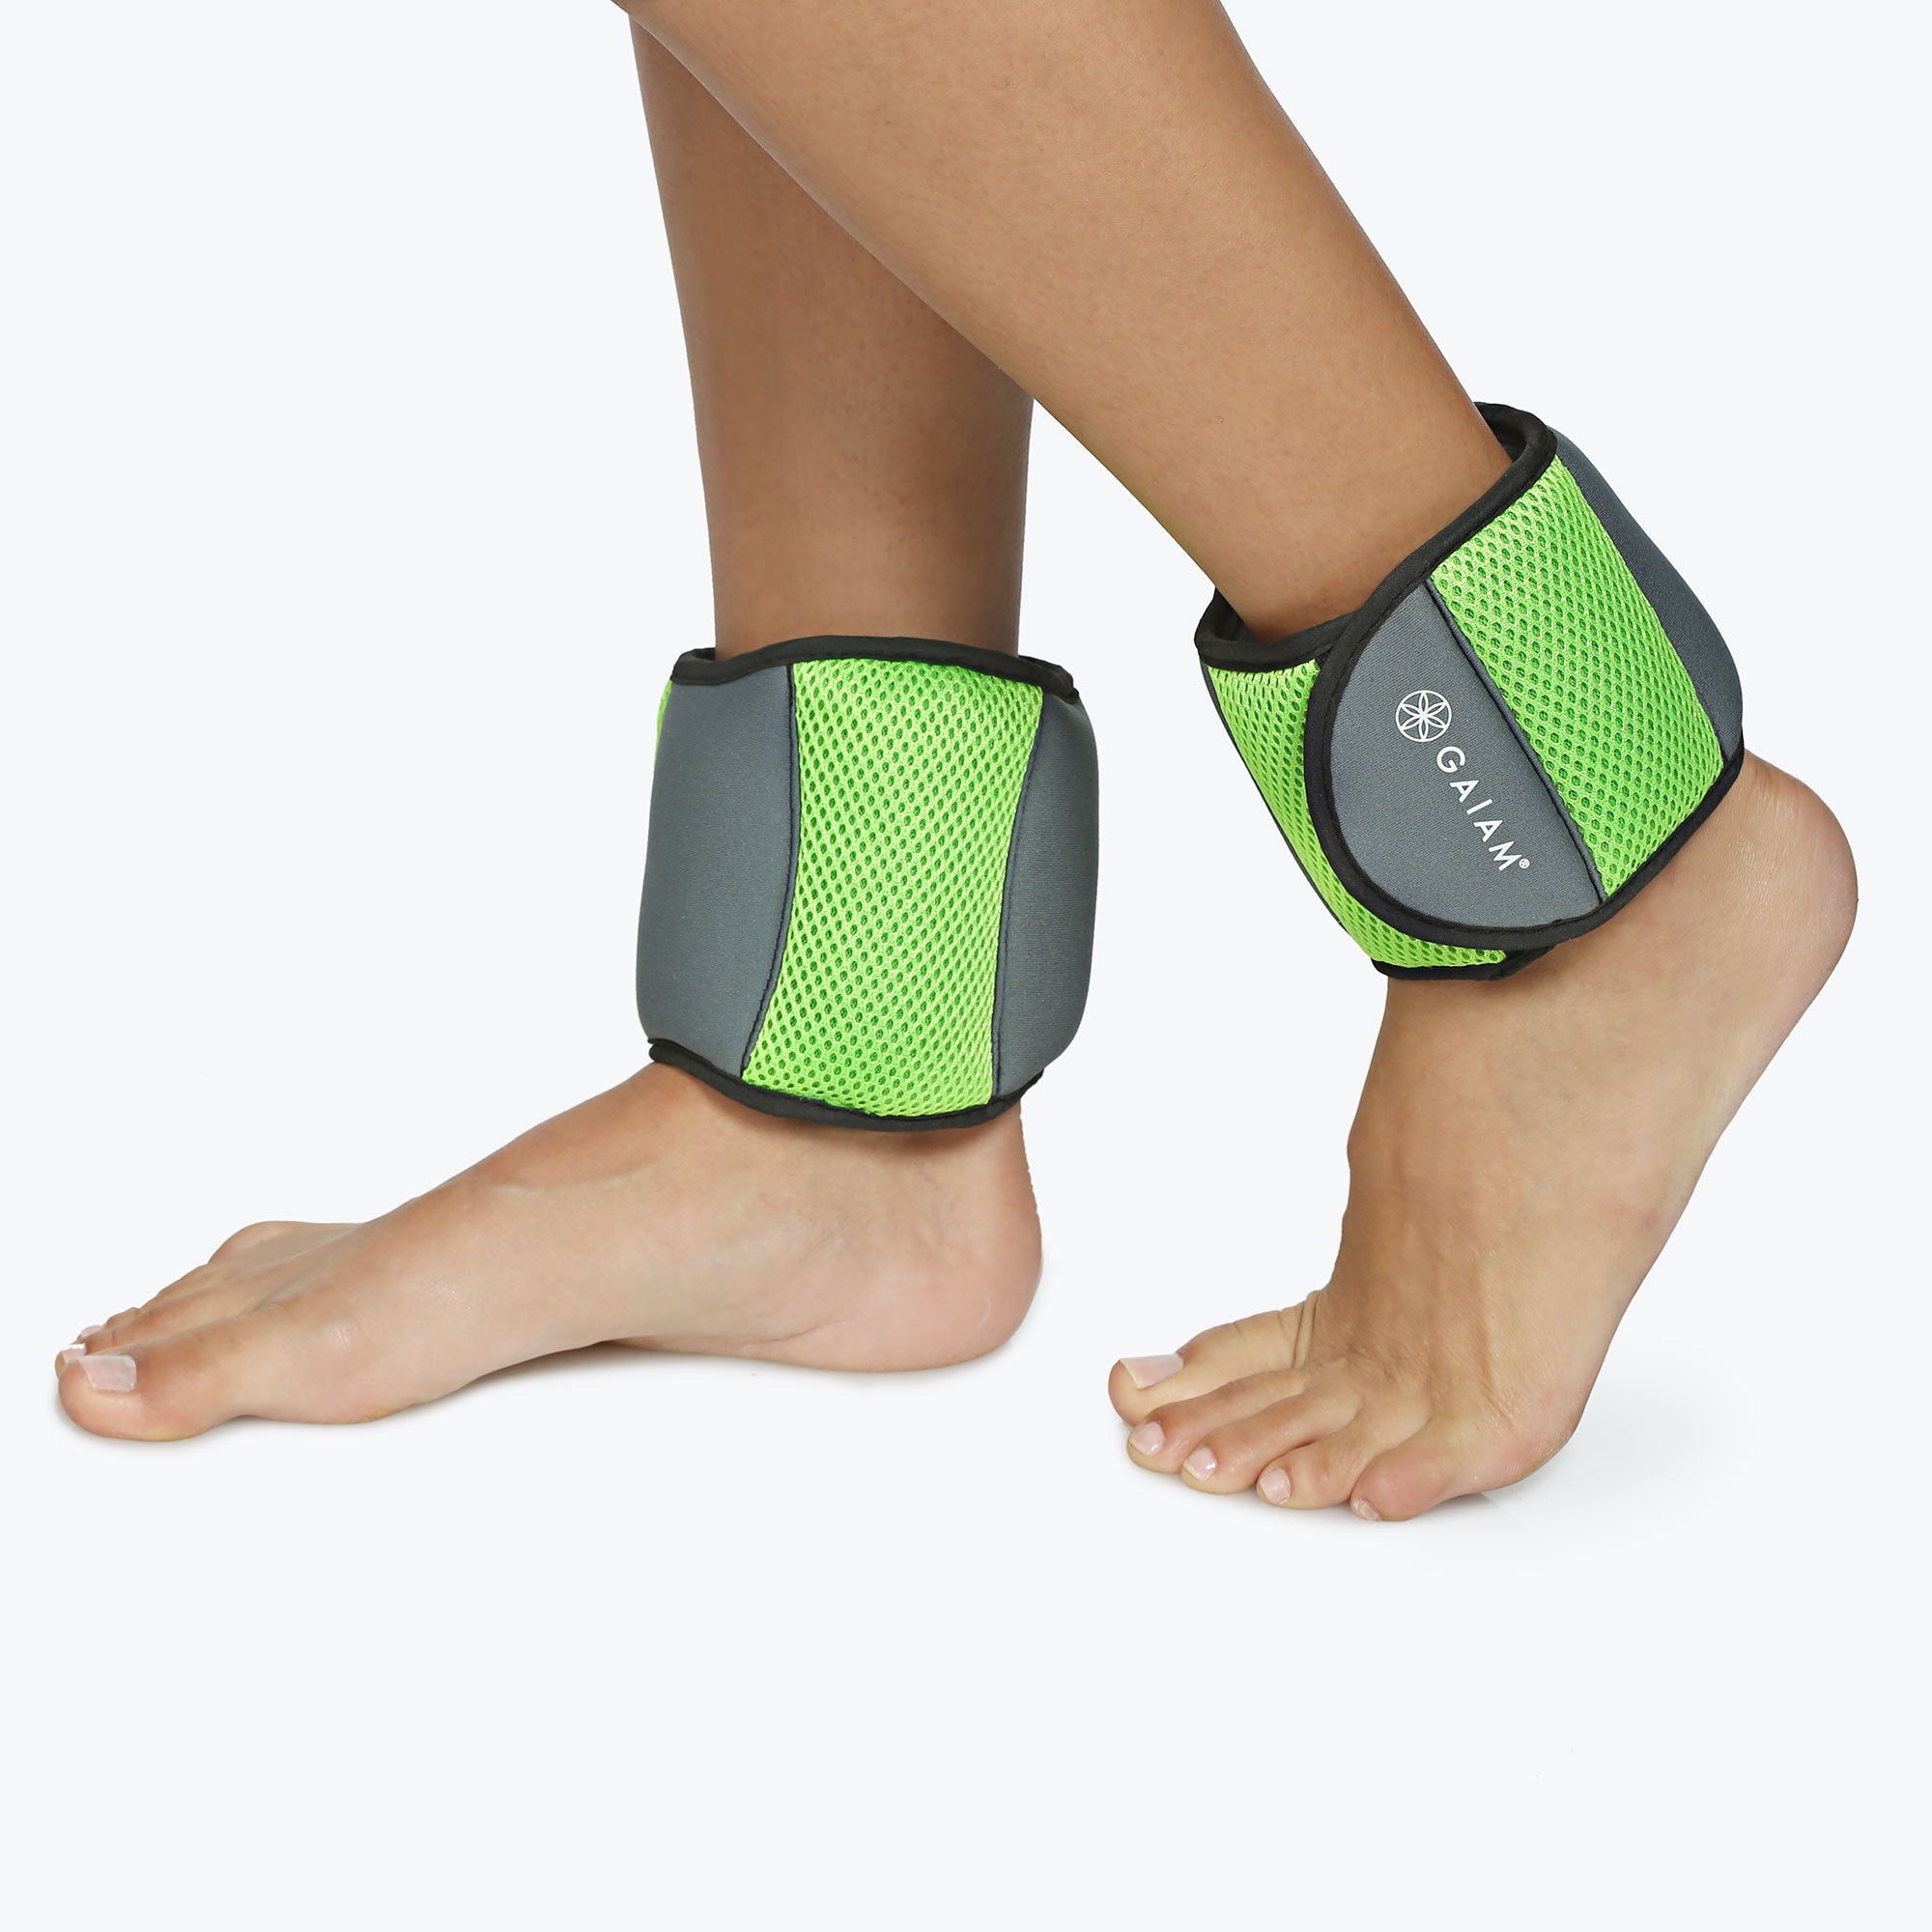 Restore Ankle Weights